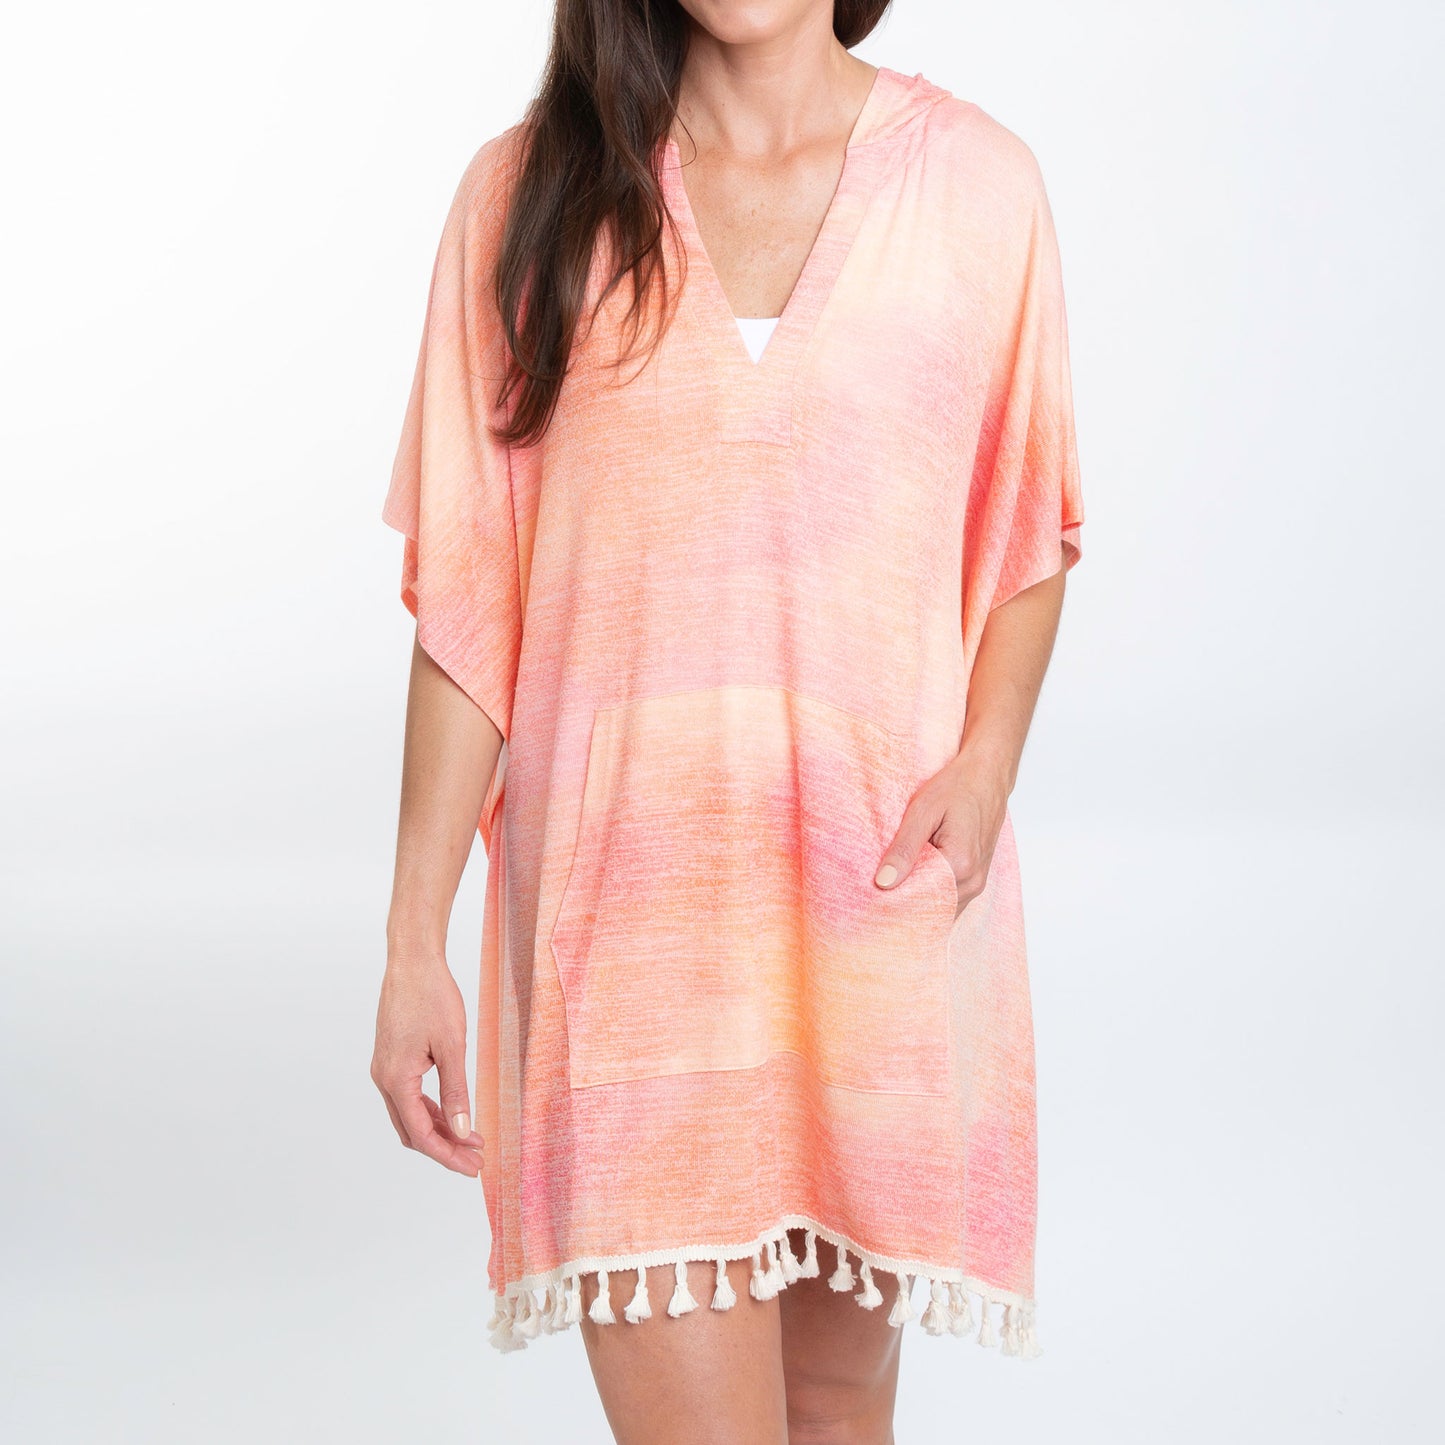 Naomi One Size Hooded Poncho Swimsuit Cover Up